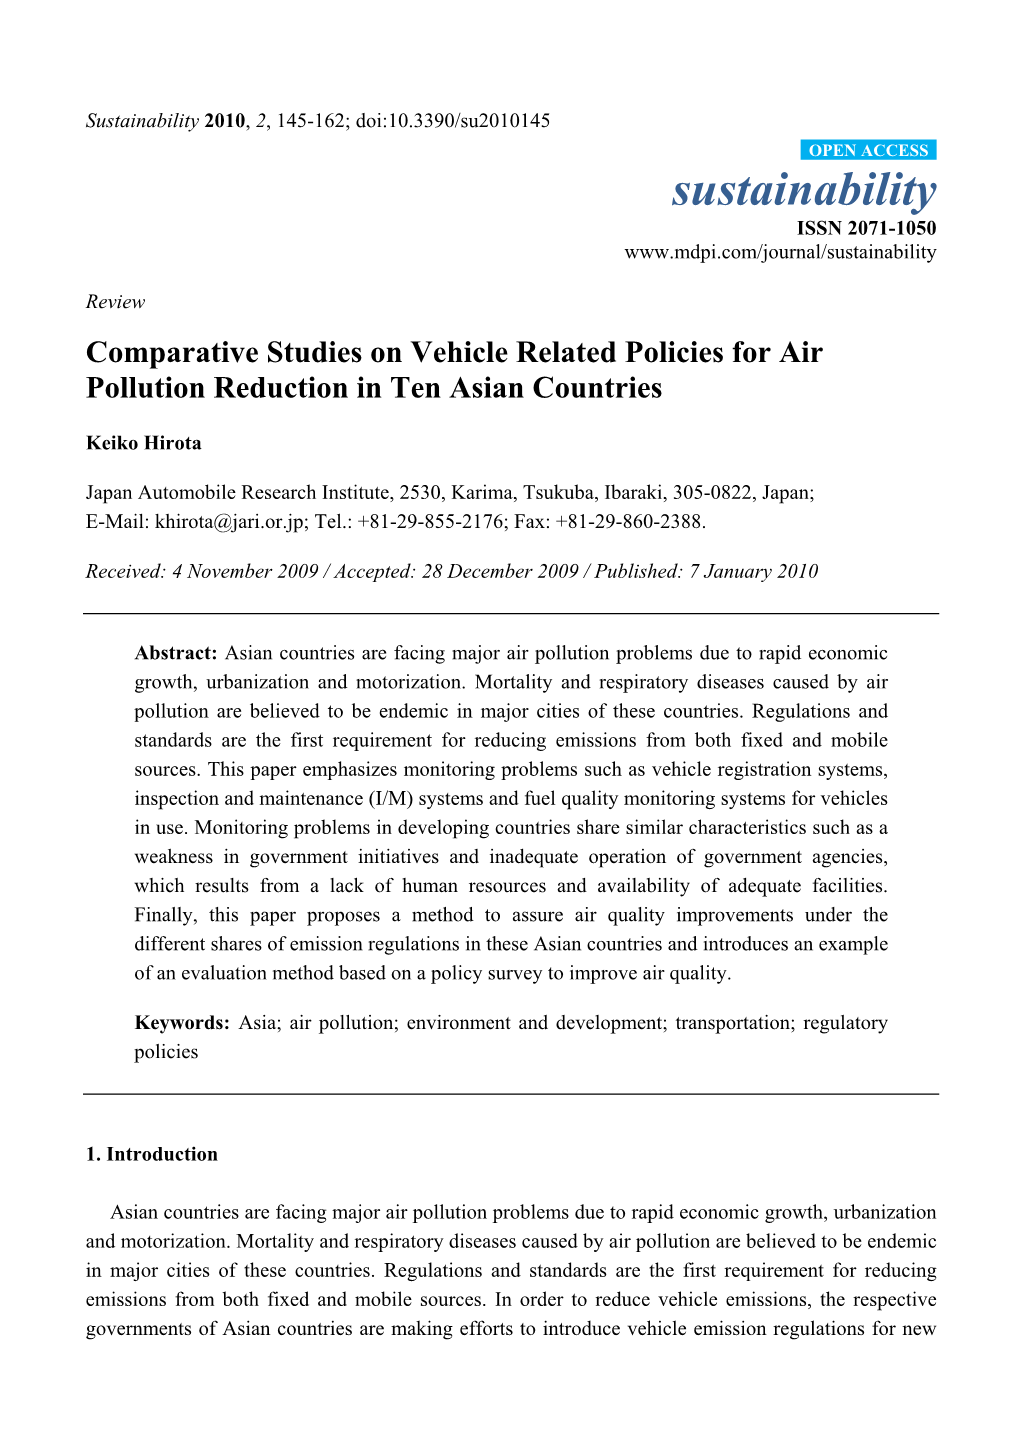 Comparative Studies on Vehicle Related Policies for Air Pollution Reduction in Ten Asian Countries